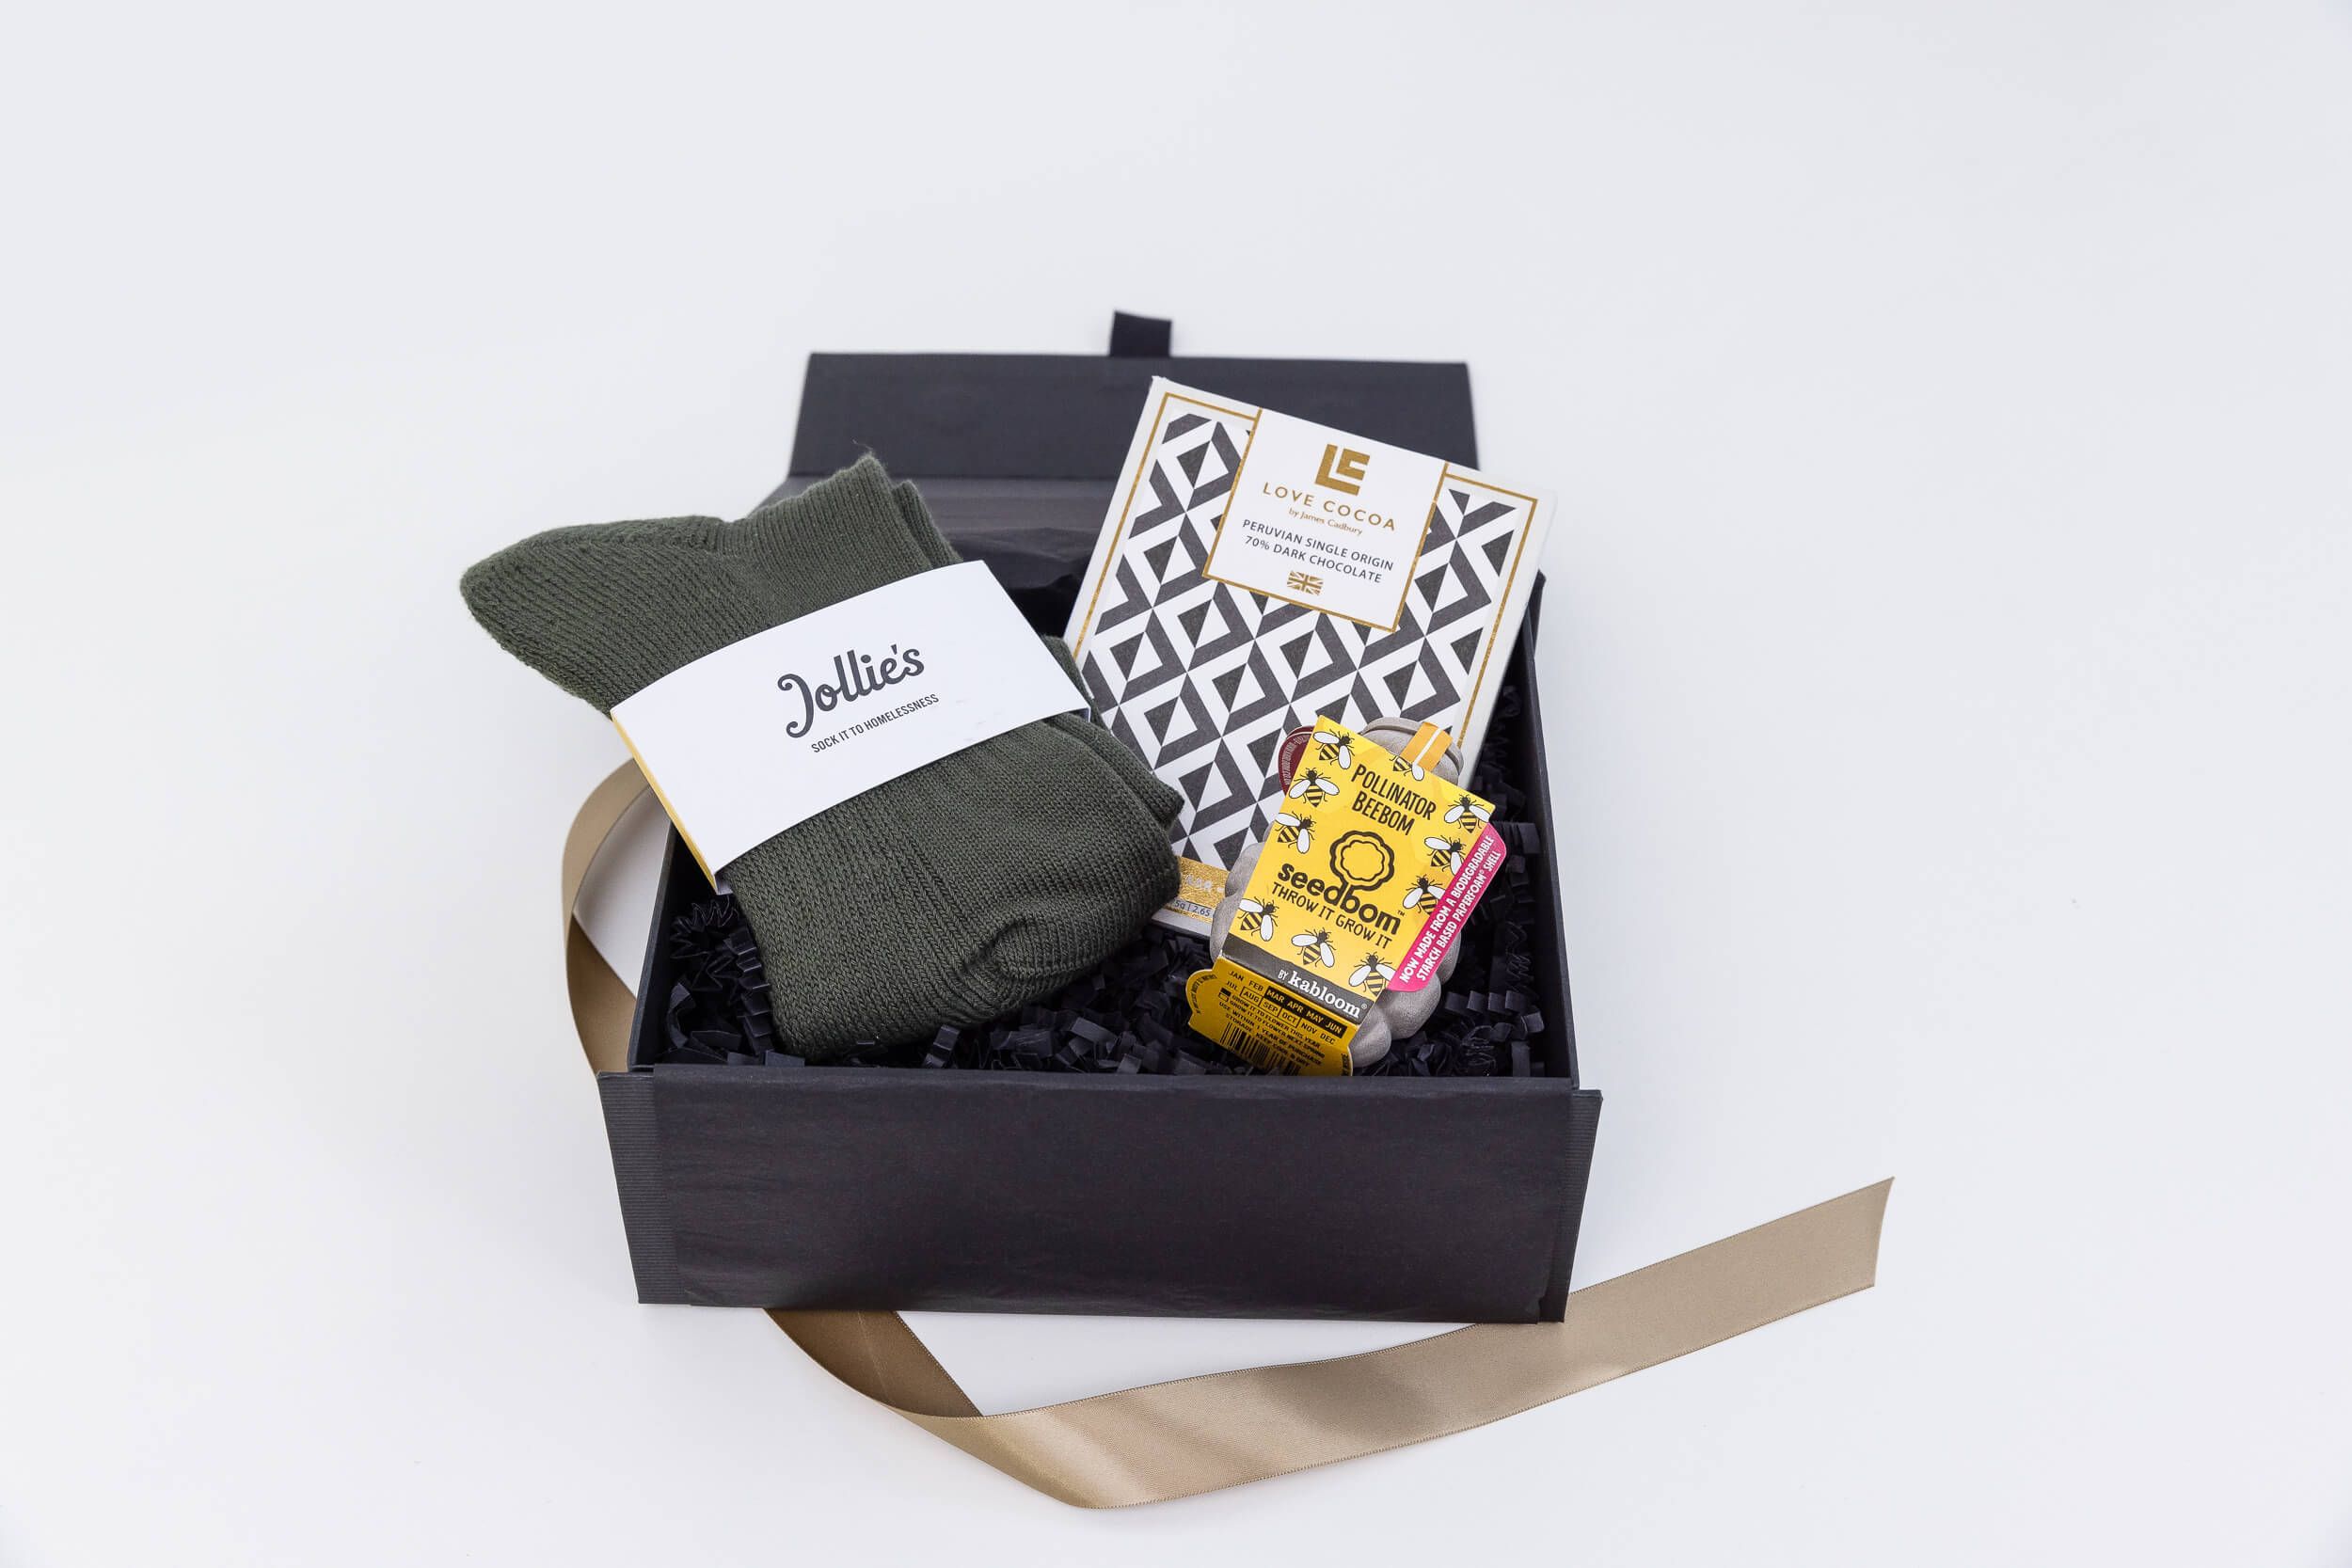 Christmas Employee Gifts with a pollinator beebom, Jollie's socks and Love Cocoa chocolate